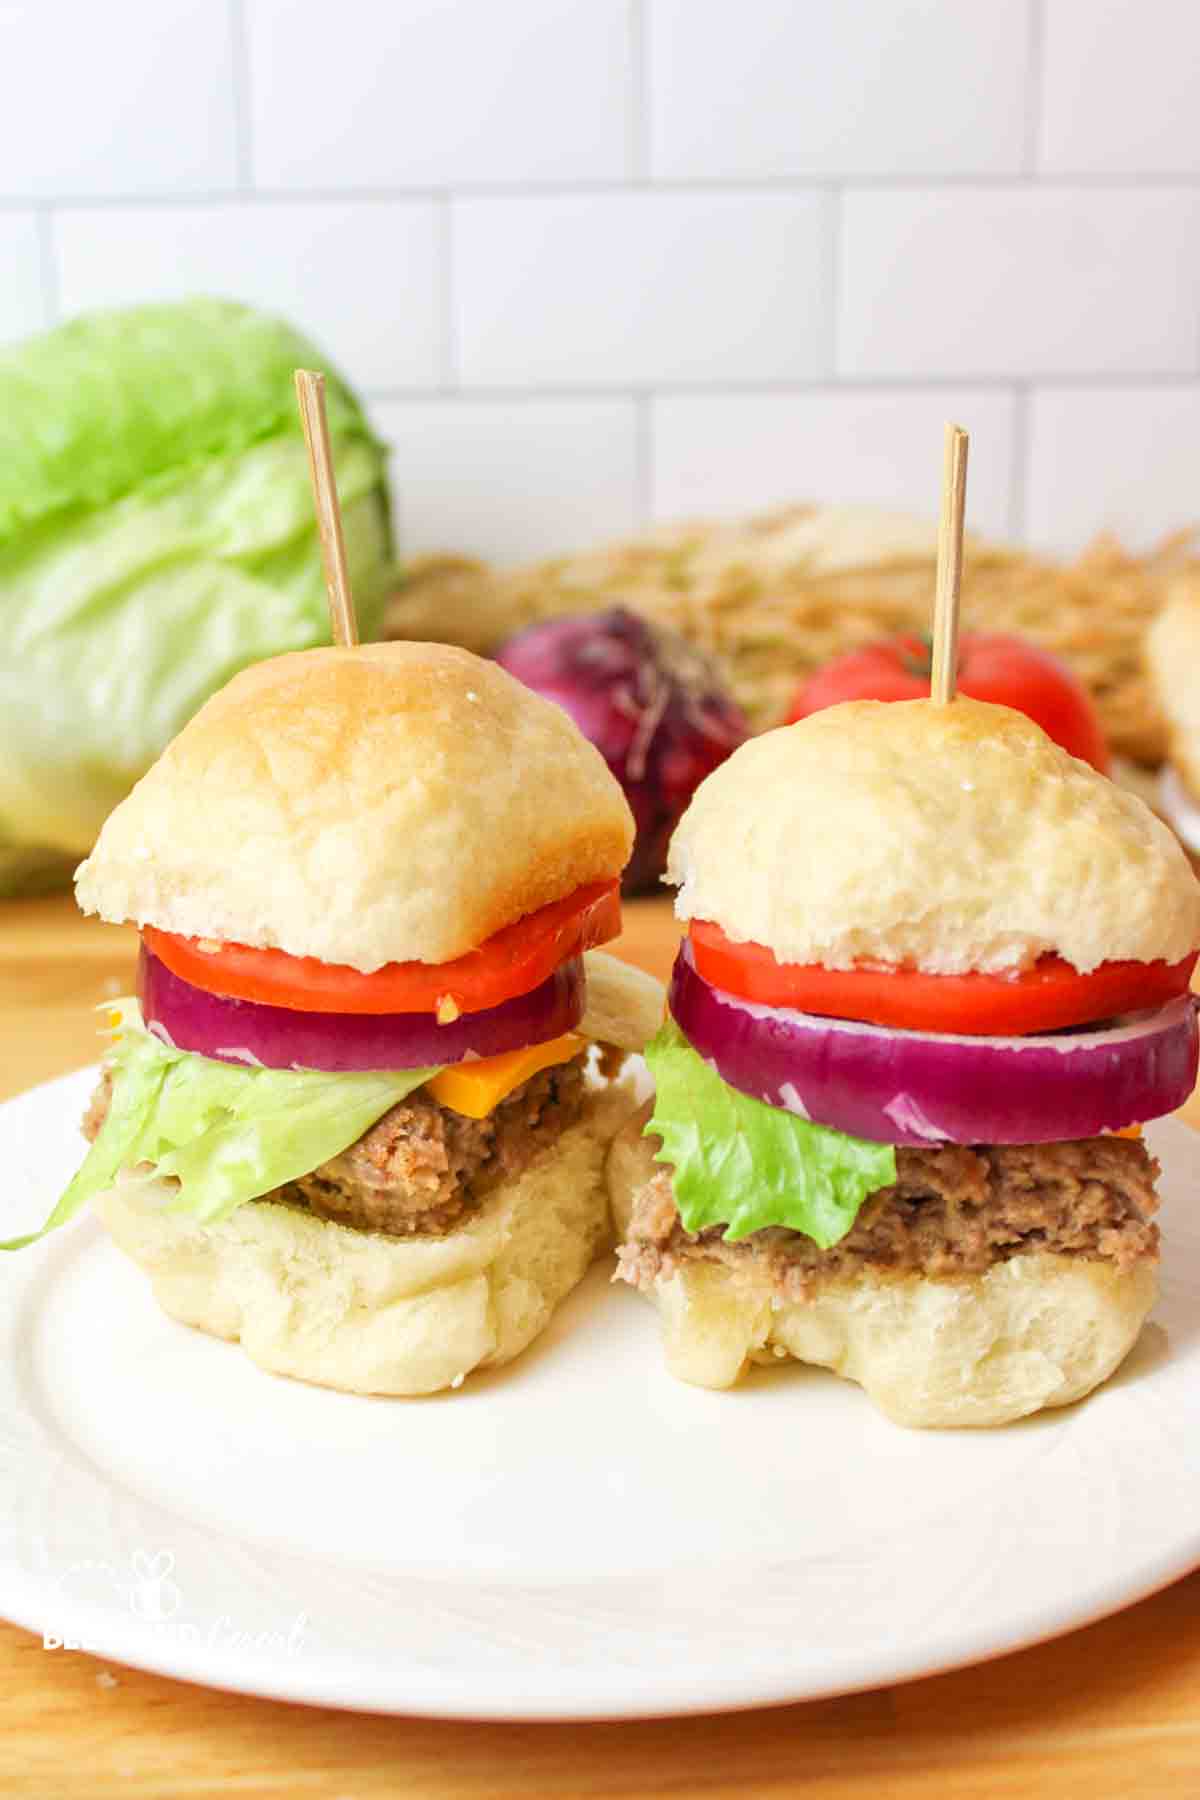 two hamburger sliders with homemade buns and toothpicks holding them together